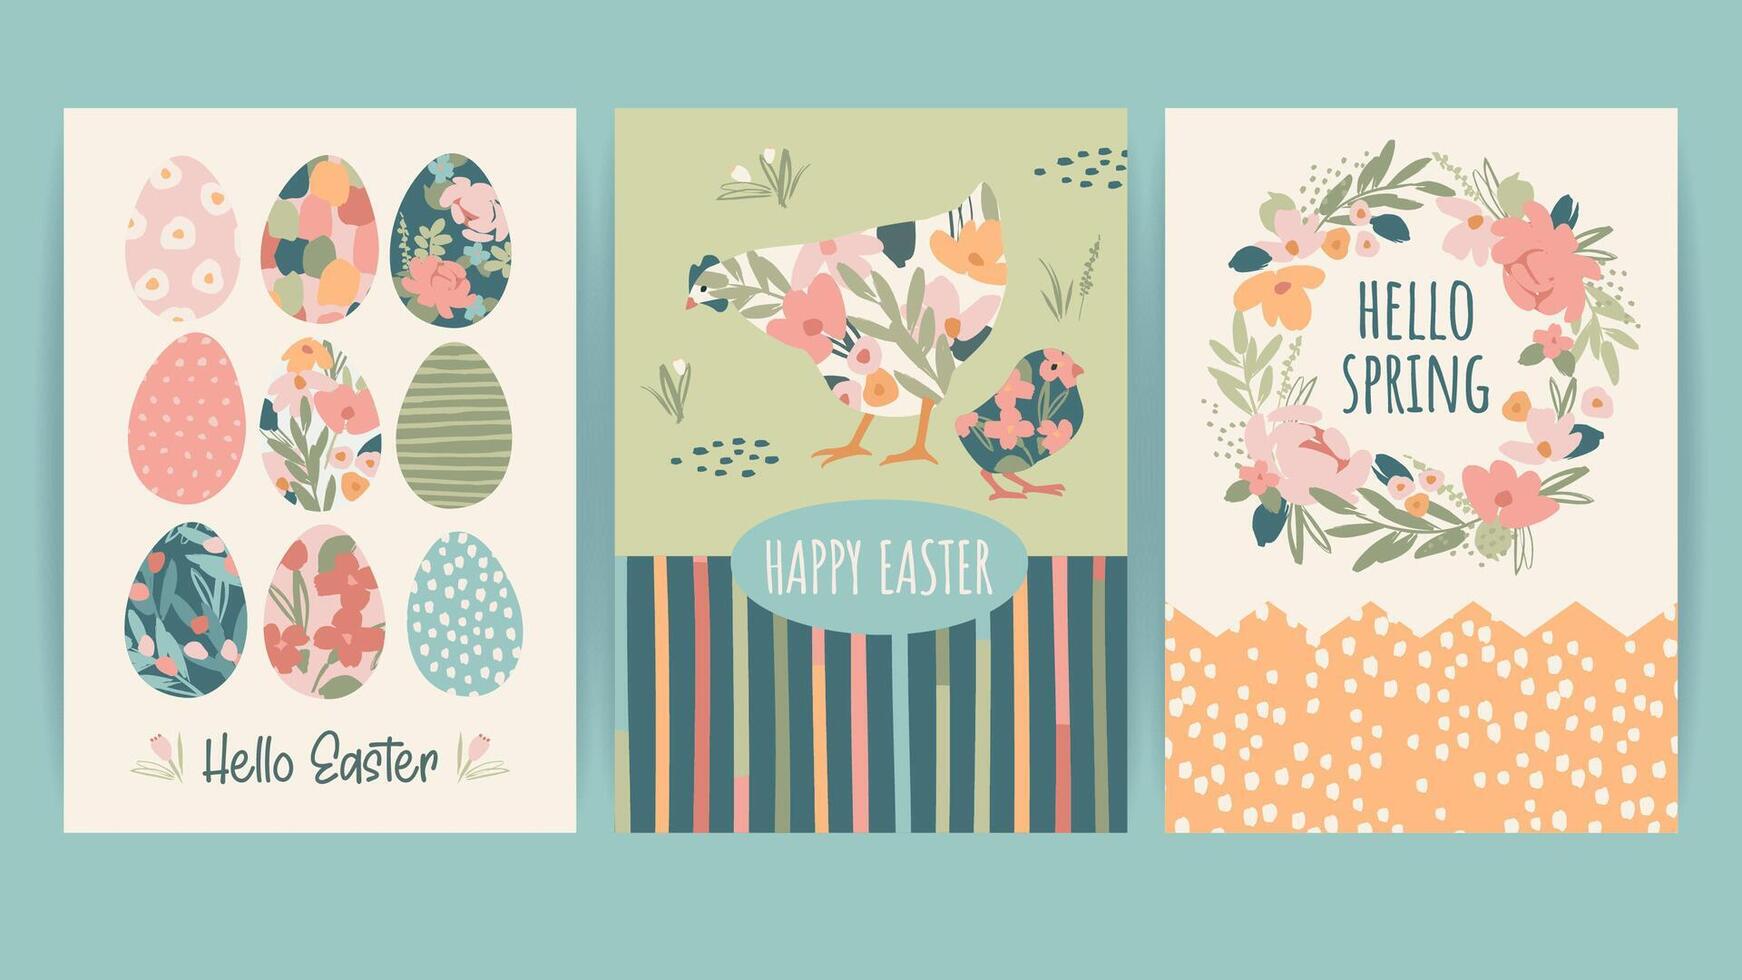 Set of Easter cards. Cute hand drawn illustrations. Vector design templates in vintage pastel colors.